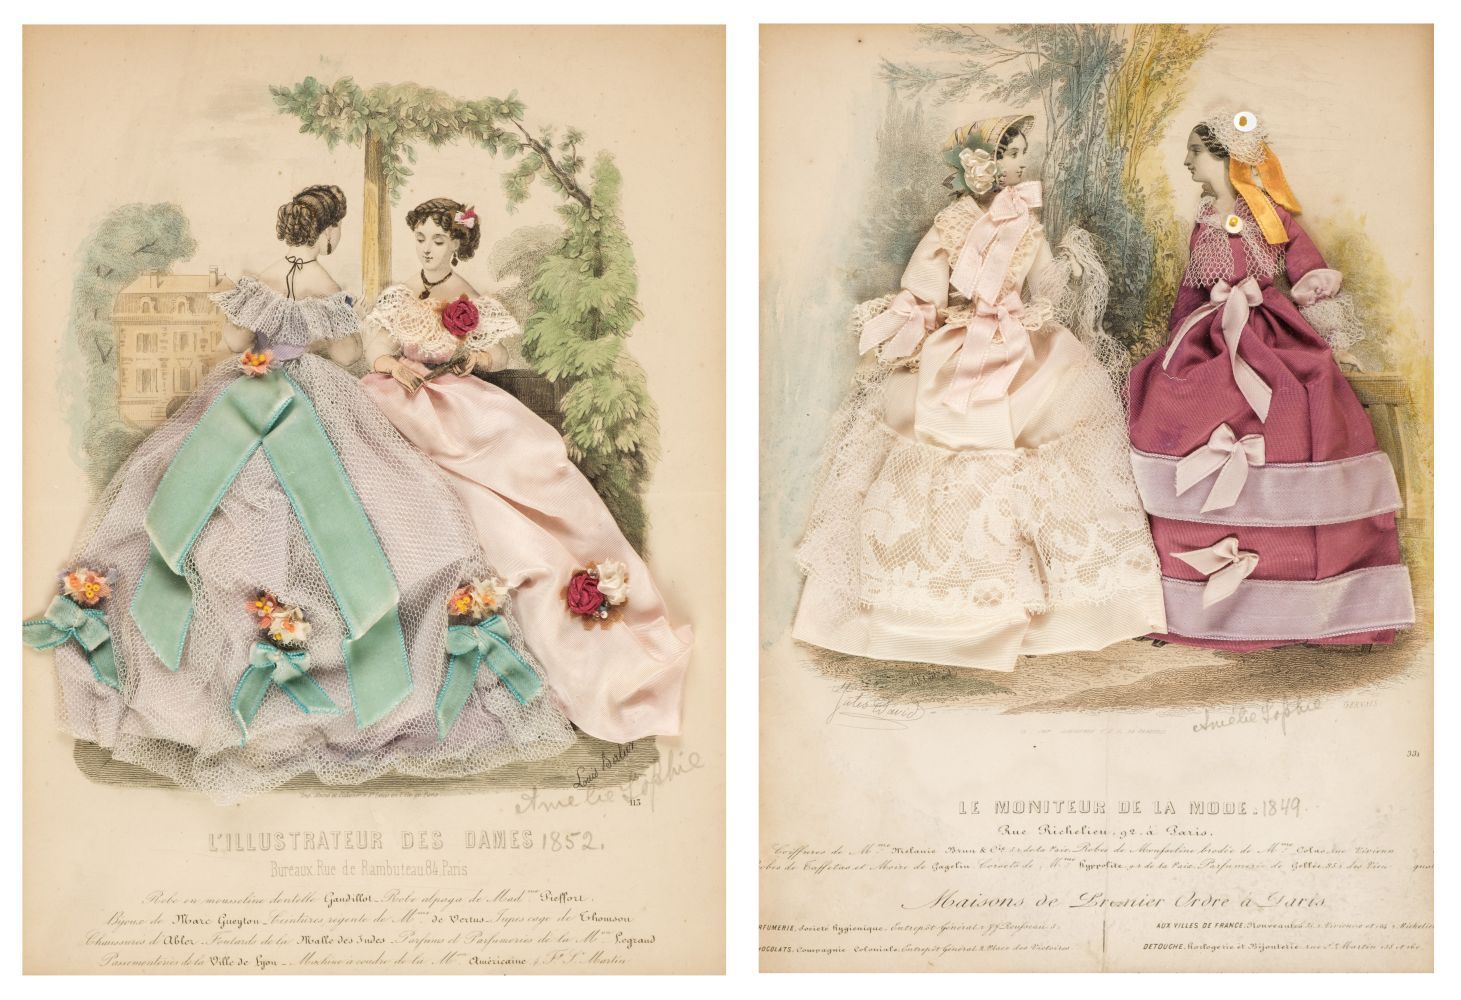 Decoupage. Two French Fashion prints overlaid with Material, circa 1850